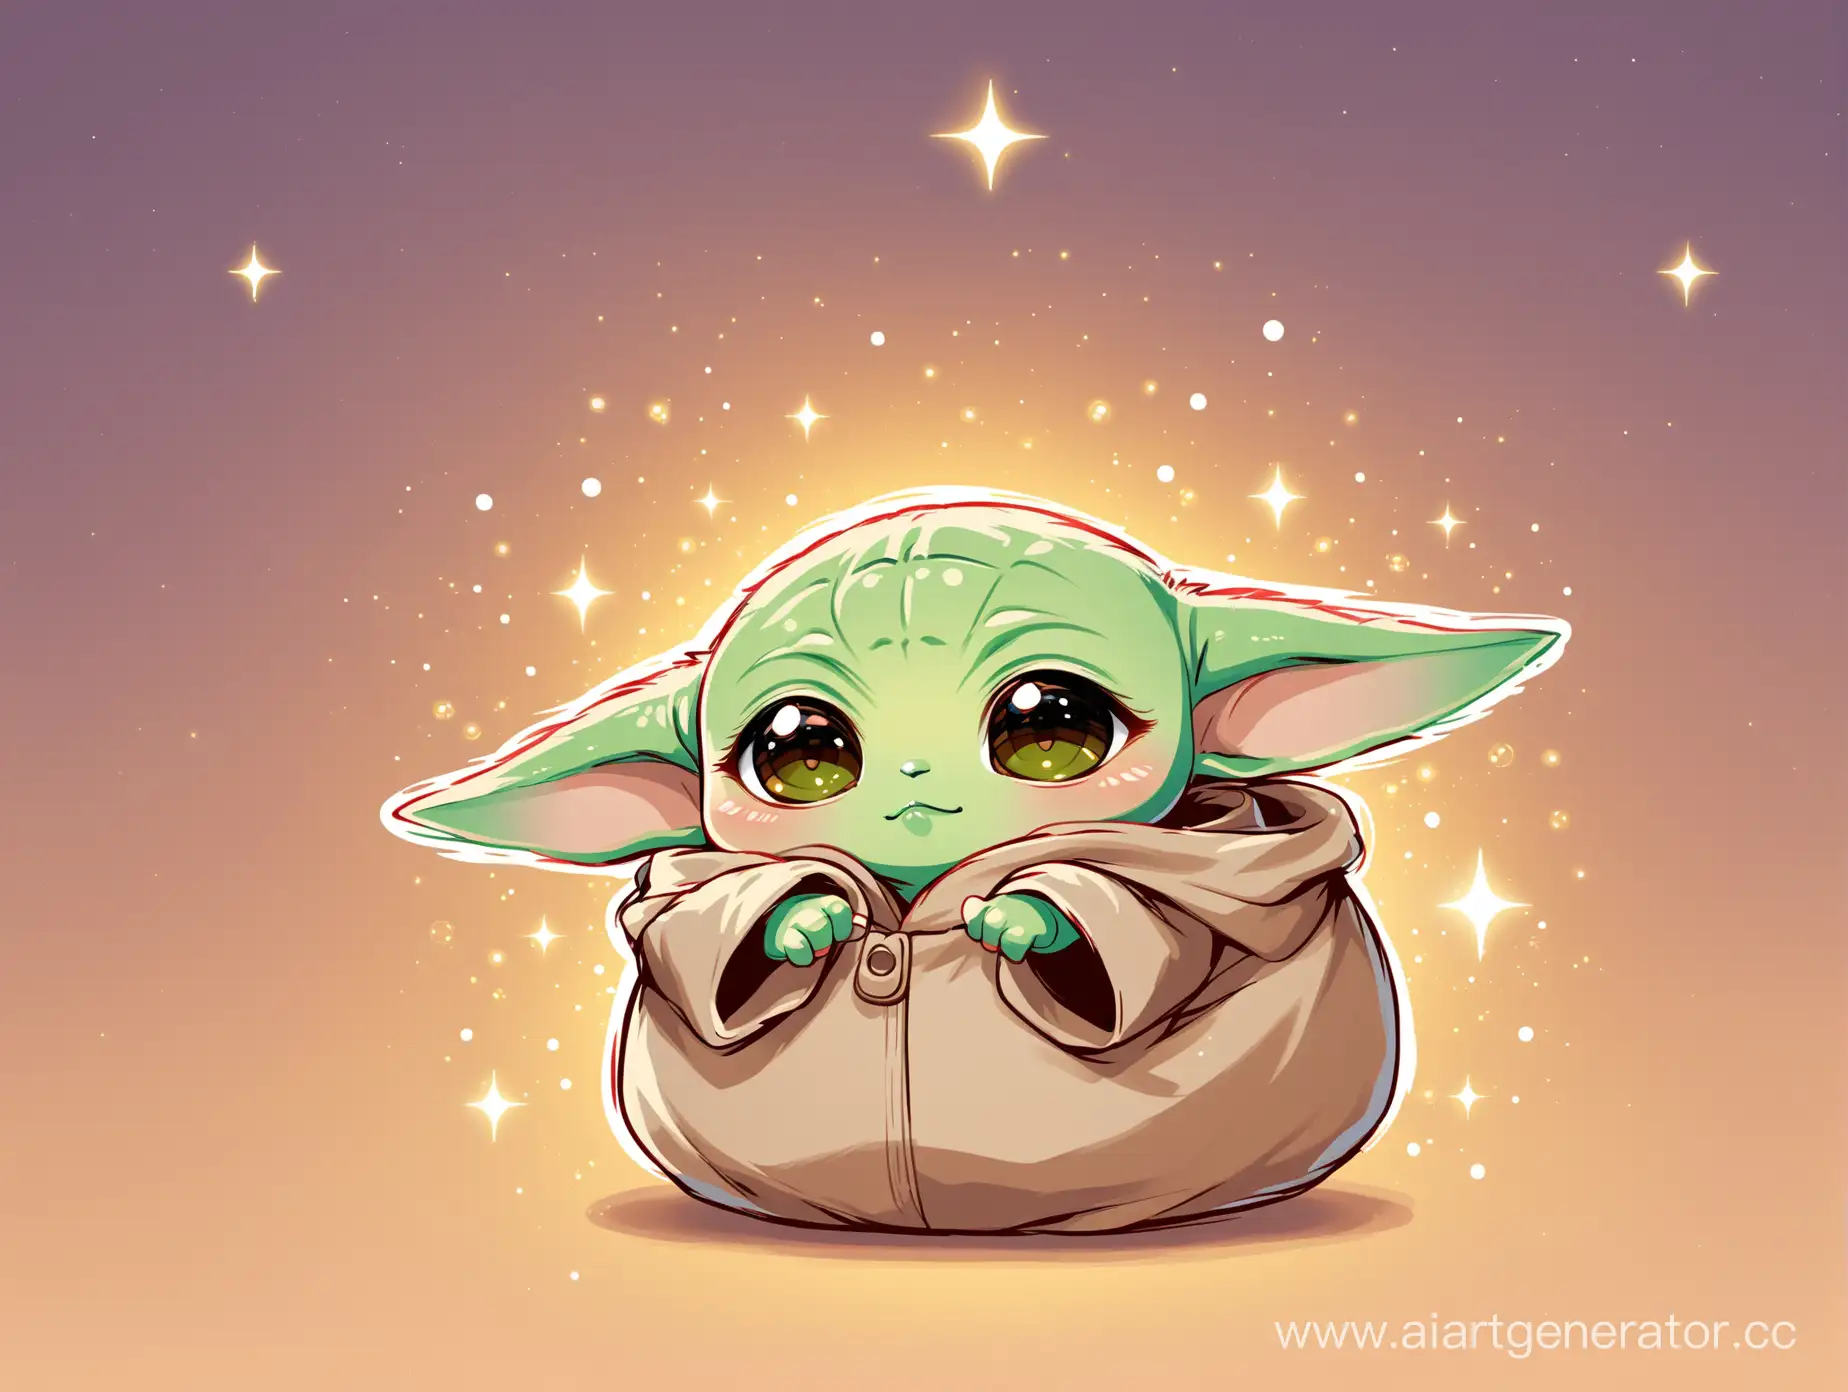 Adorable-Baby-Yoda-Heartwarming-Artwork-of-the-Beloved-Character